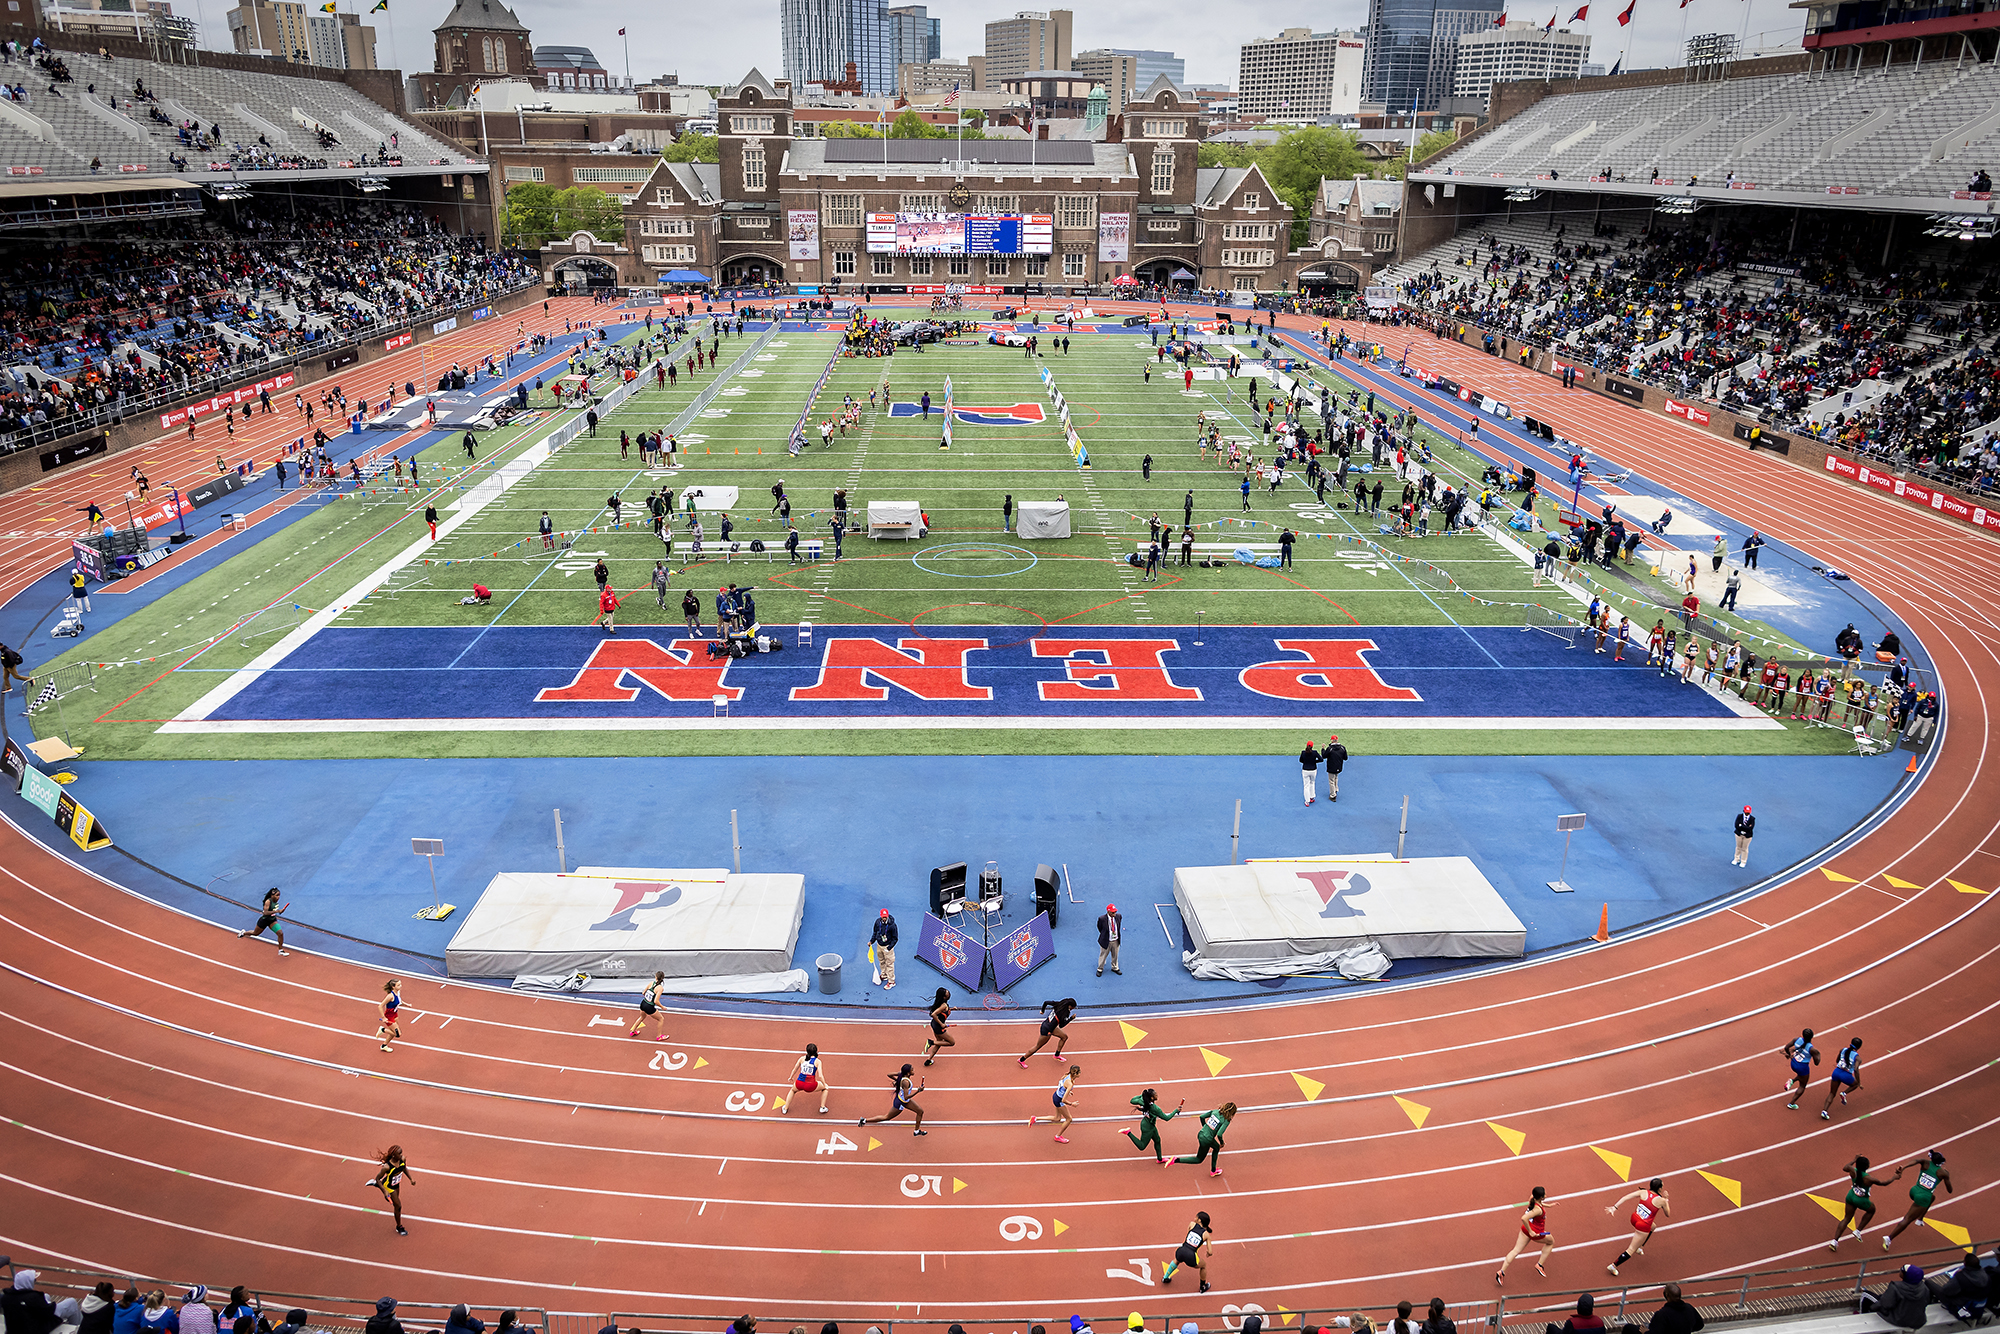 Runners race at Franklin Field during the Penn Relays.